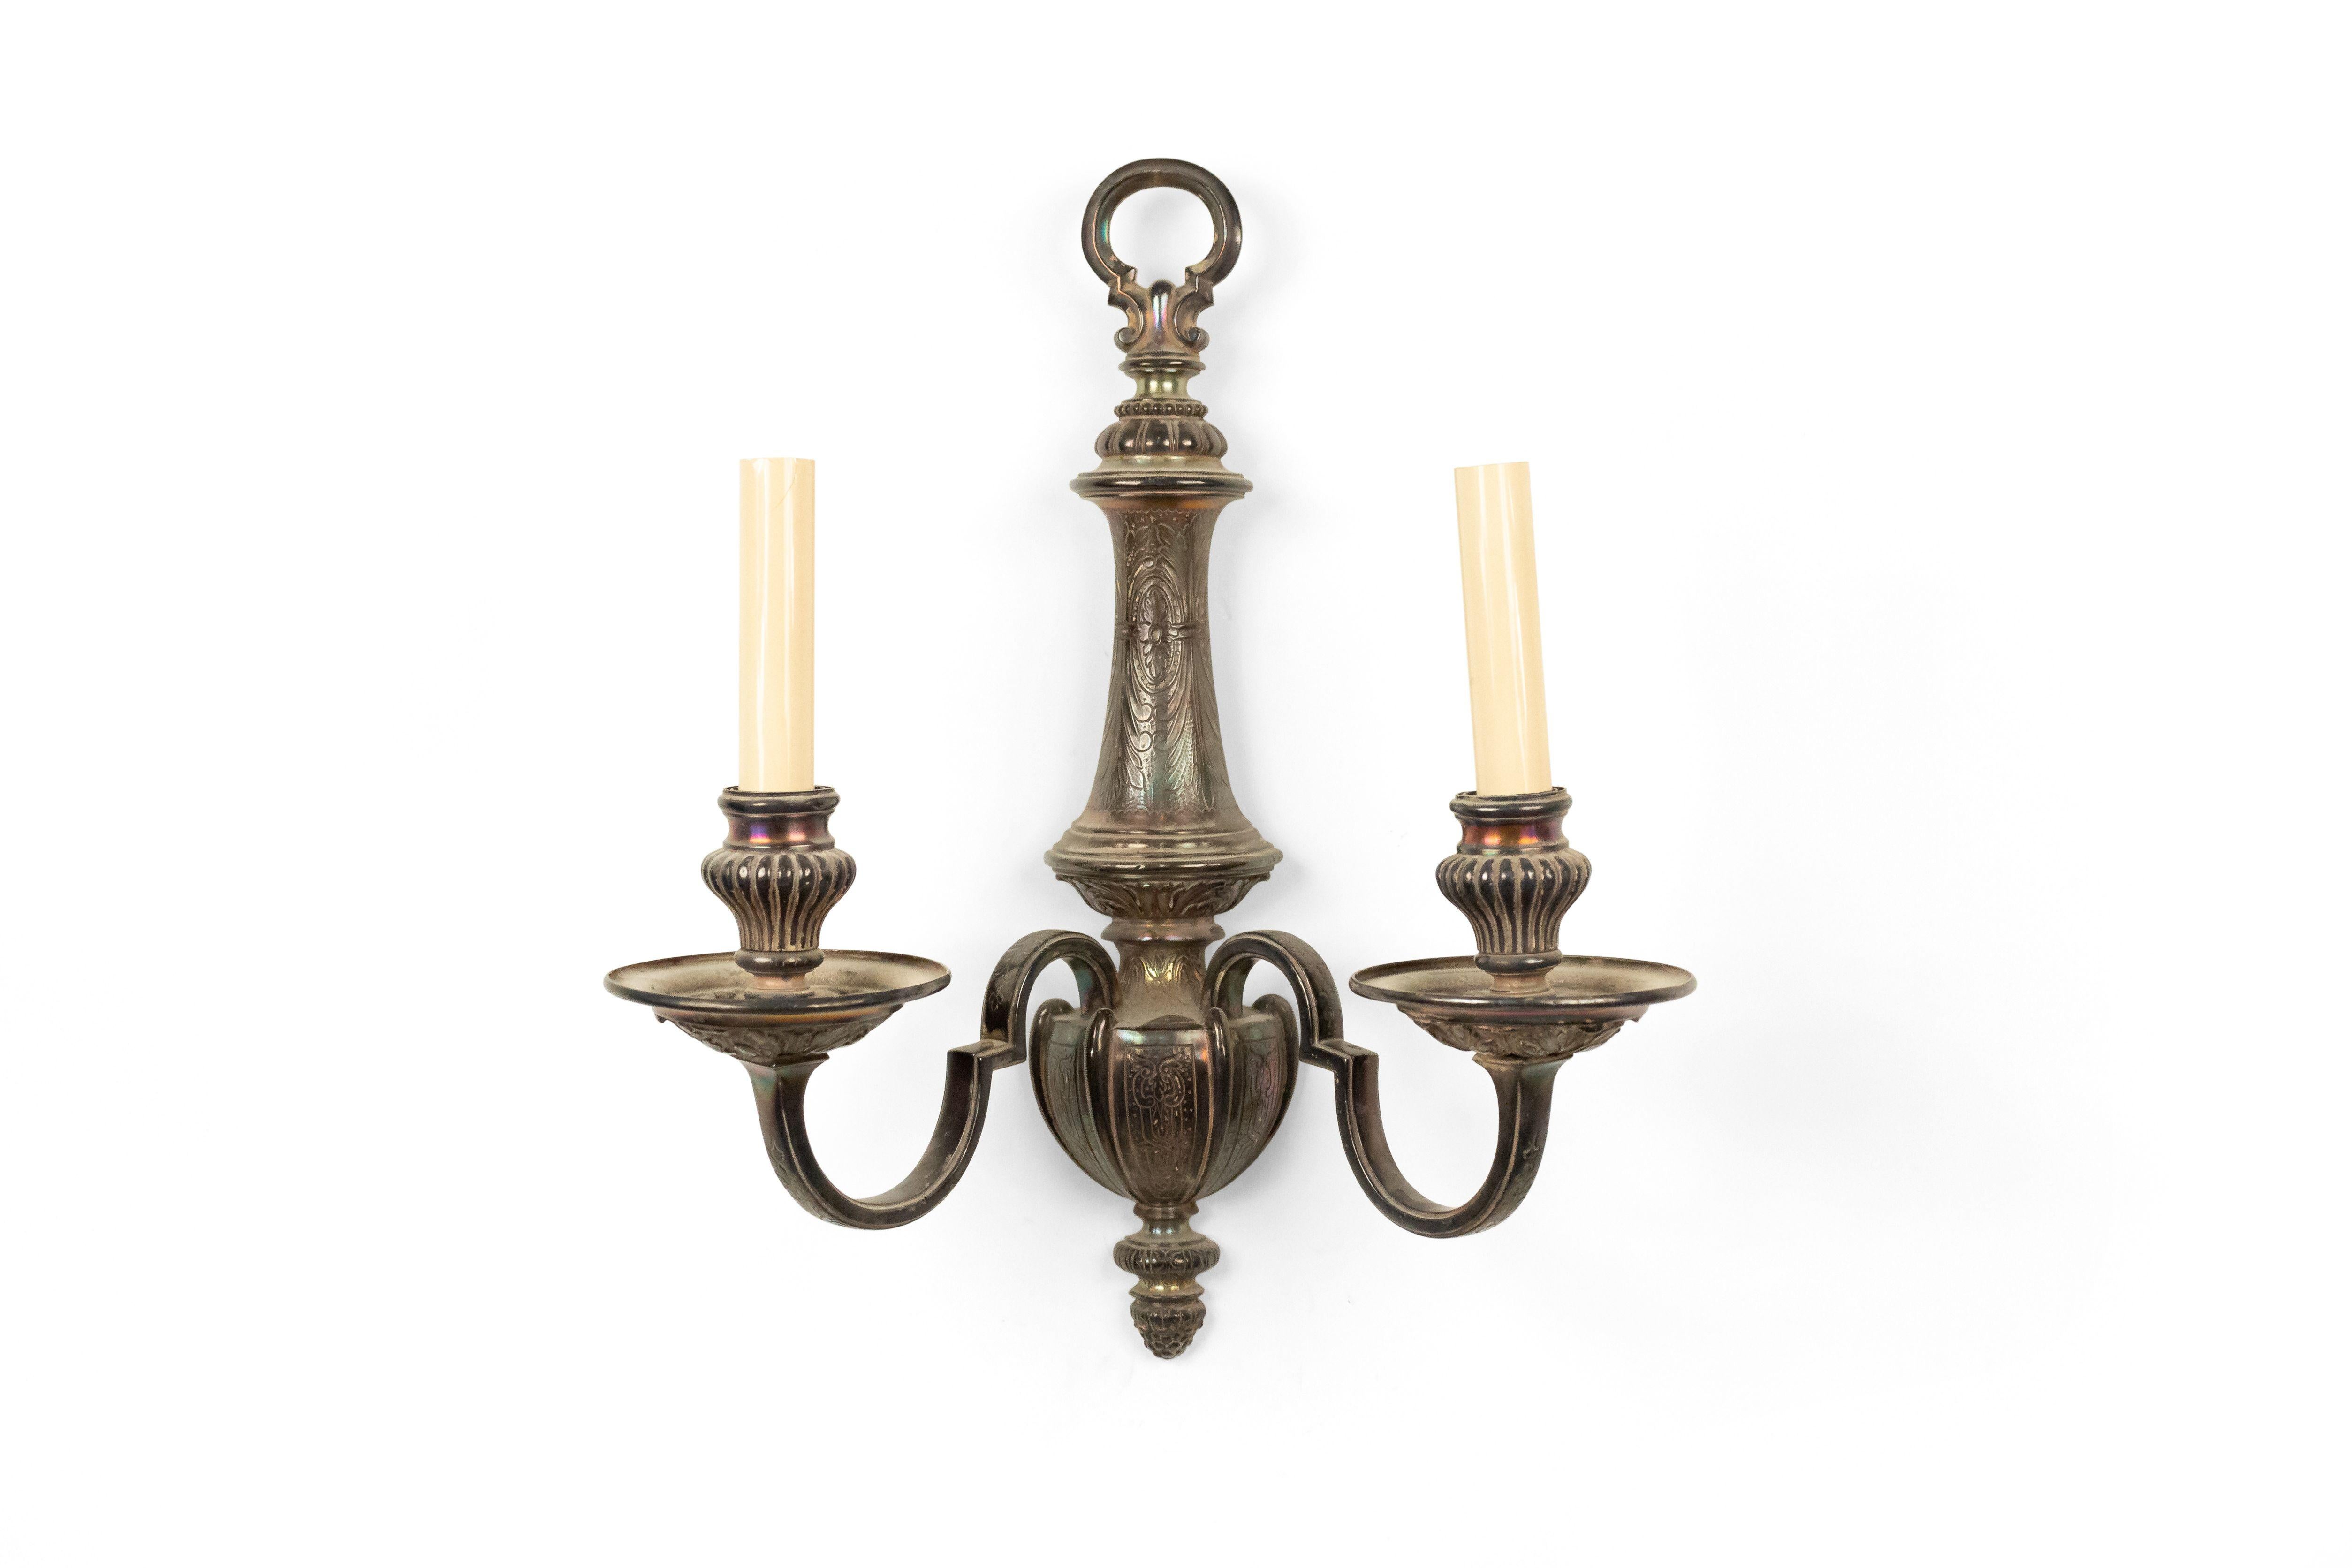 English Georgian-style (19/20th Century) etched silver plate wall sconce with two arms and a ring top.
